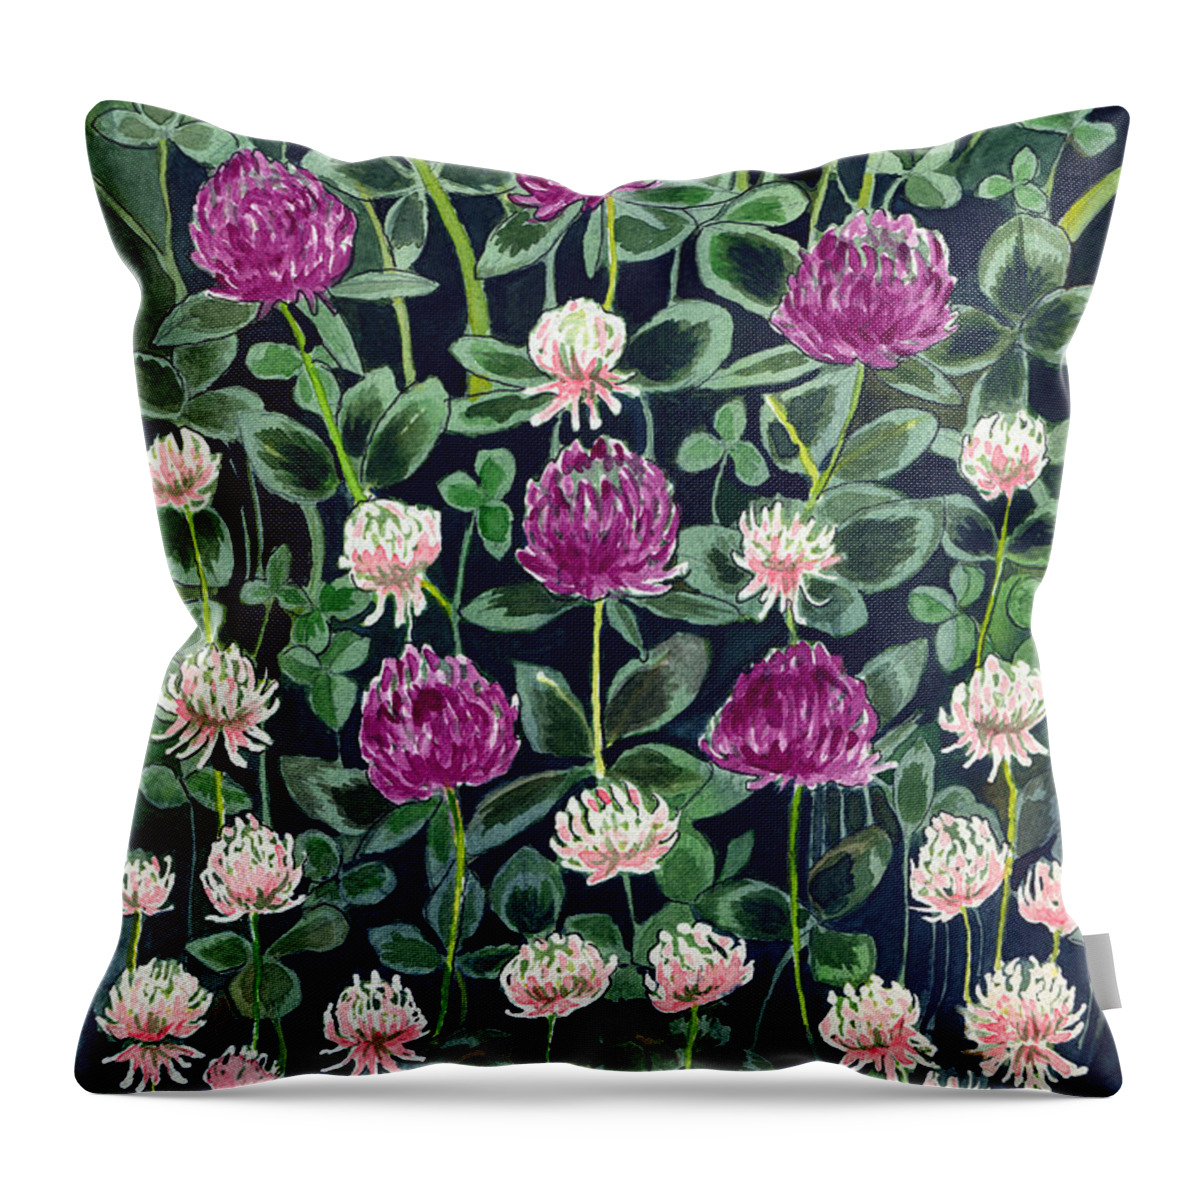 White Clover Throw Pillow featuring the painting Clover by Katherine Miller